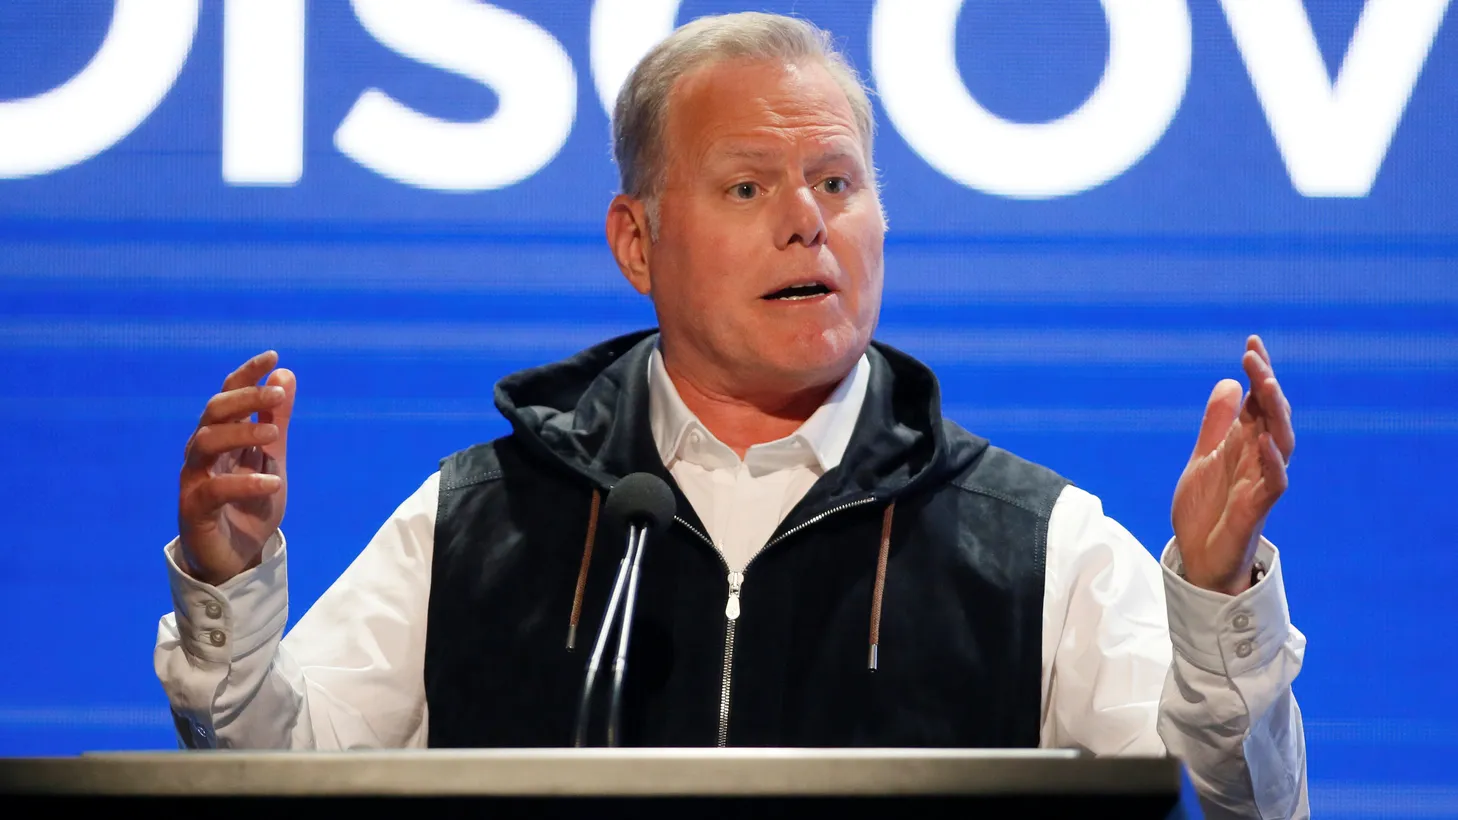 President and CEO of Discovery David Zaslav speaks during the Discovery portion of the Television Critics Association (TCA) Summer Press Tour in Beverly Hills, California, U.S., July 25, 2019.